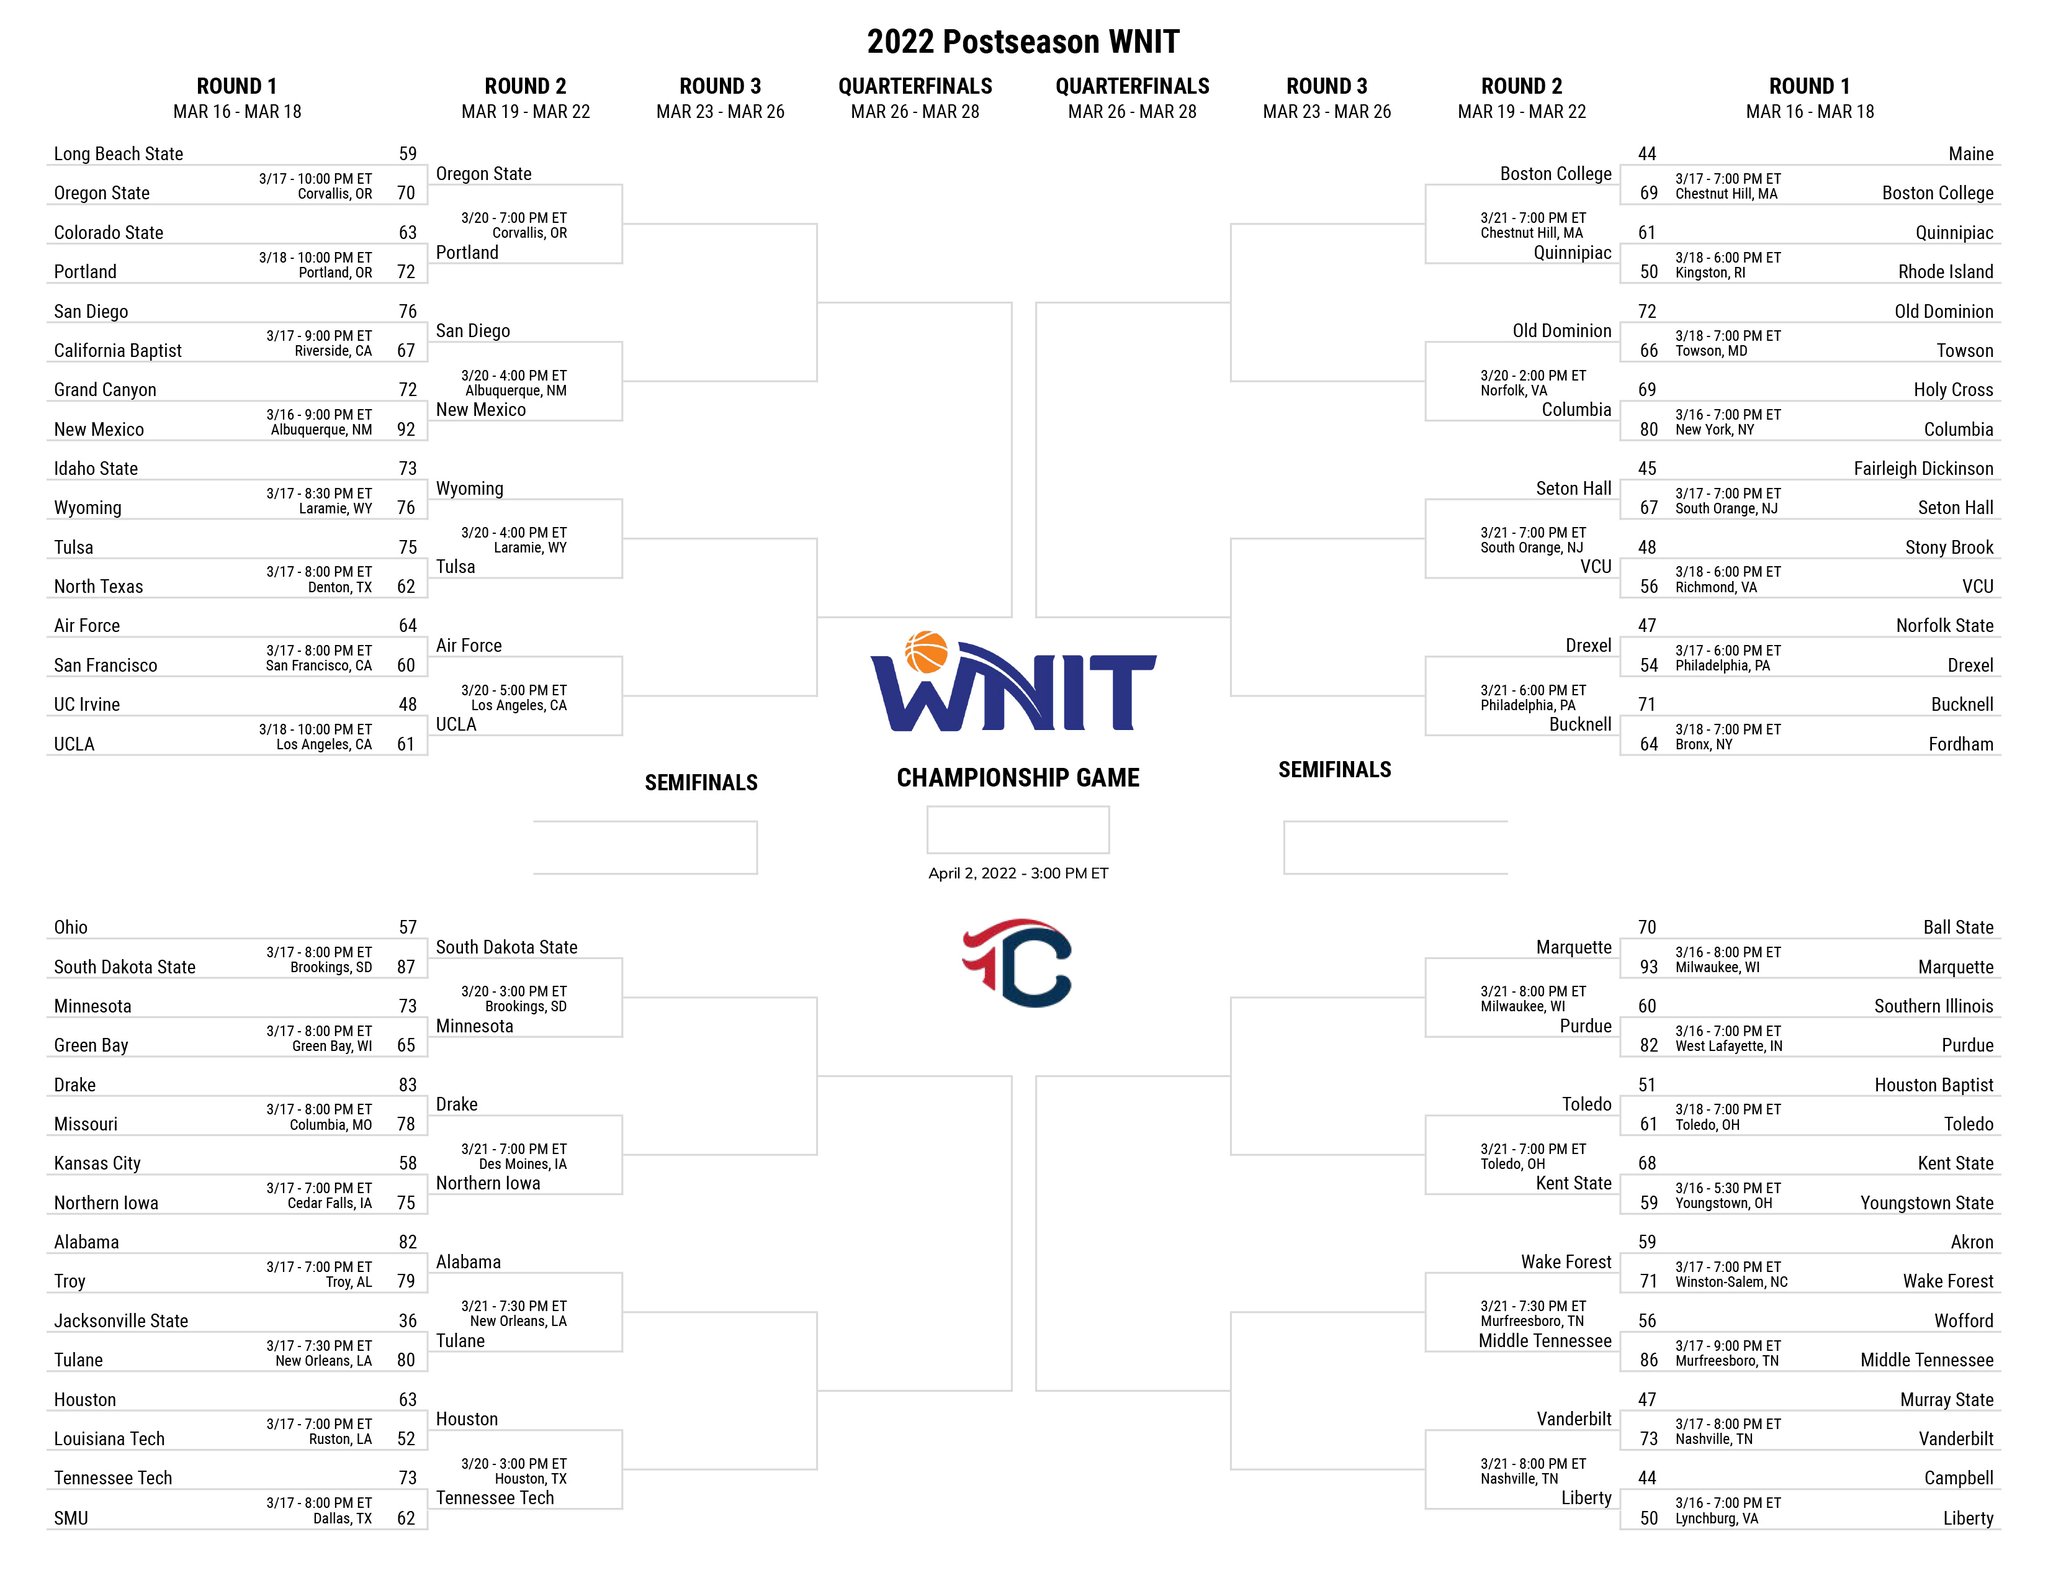 WNIT on Twitter "With the first round of the 2022 Postseason WNIT